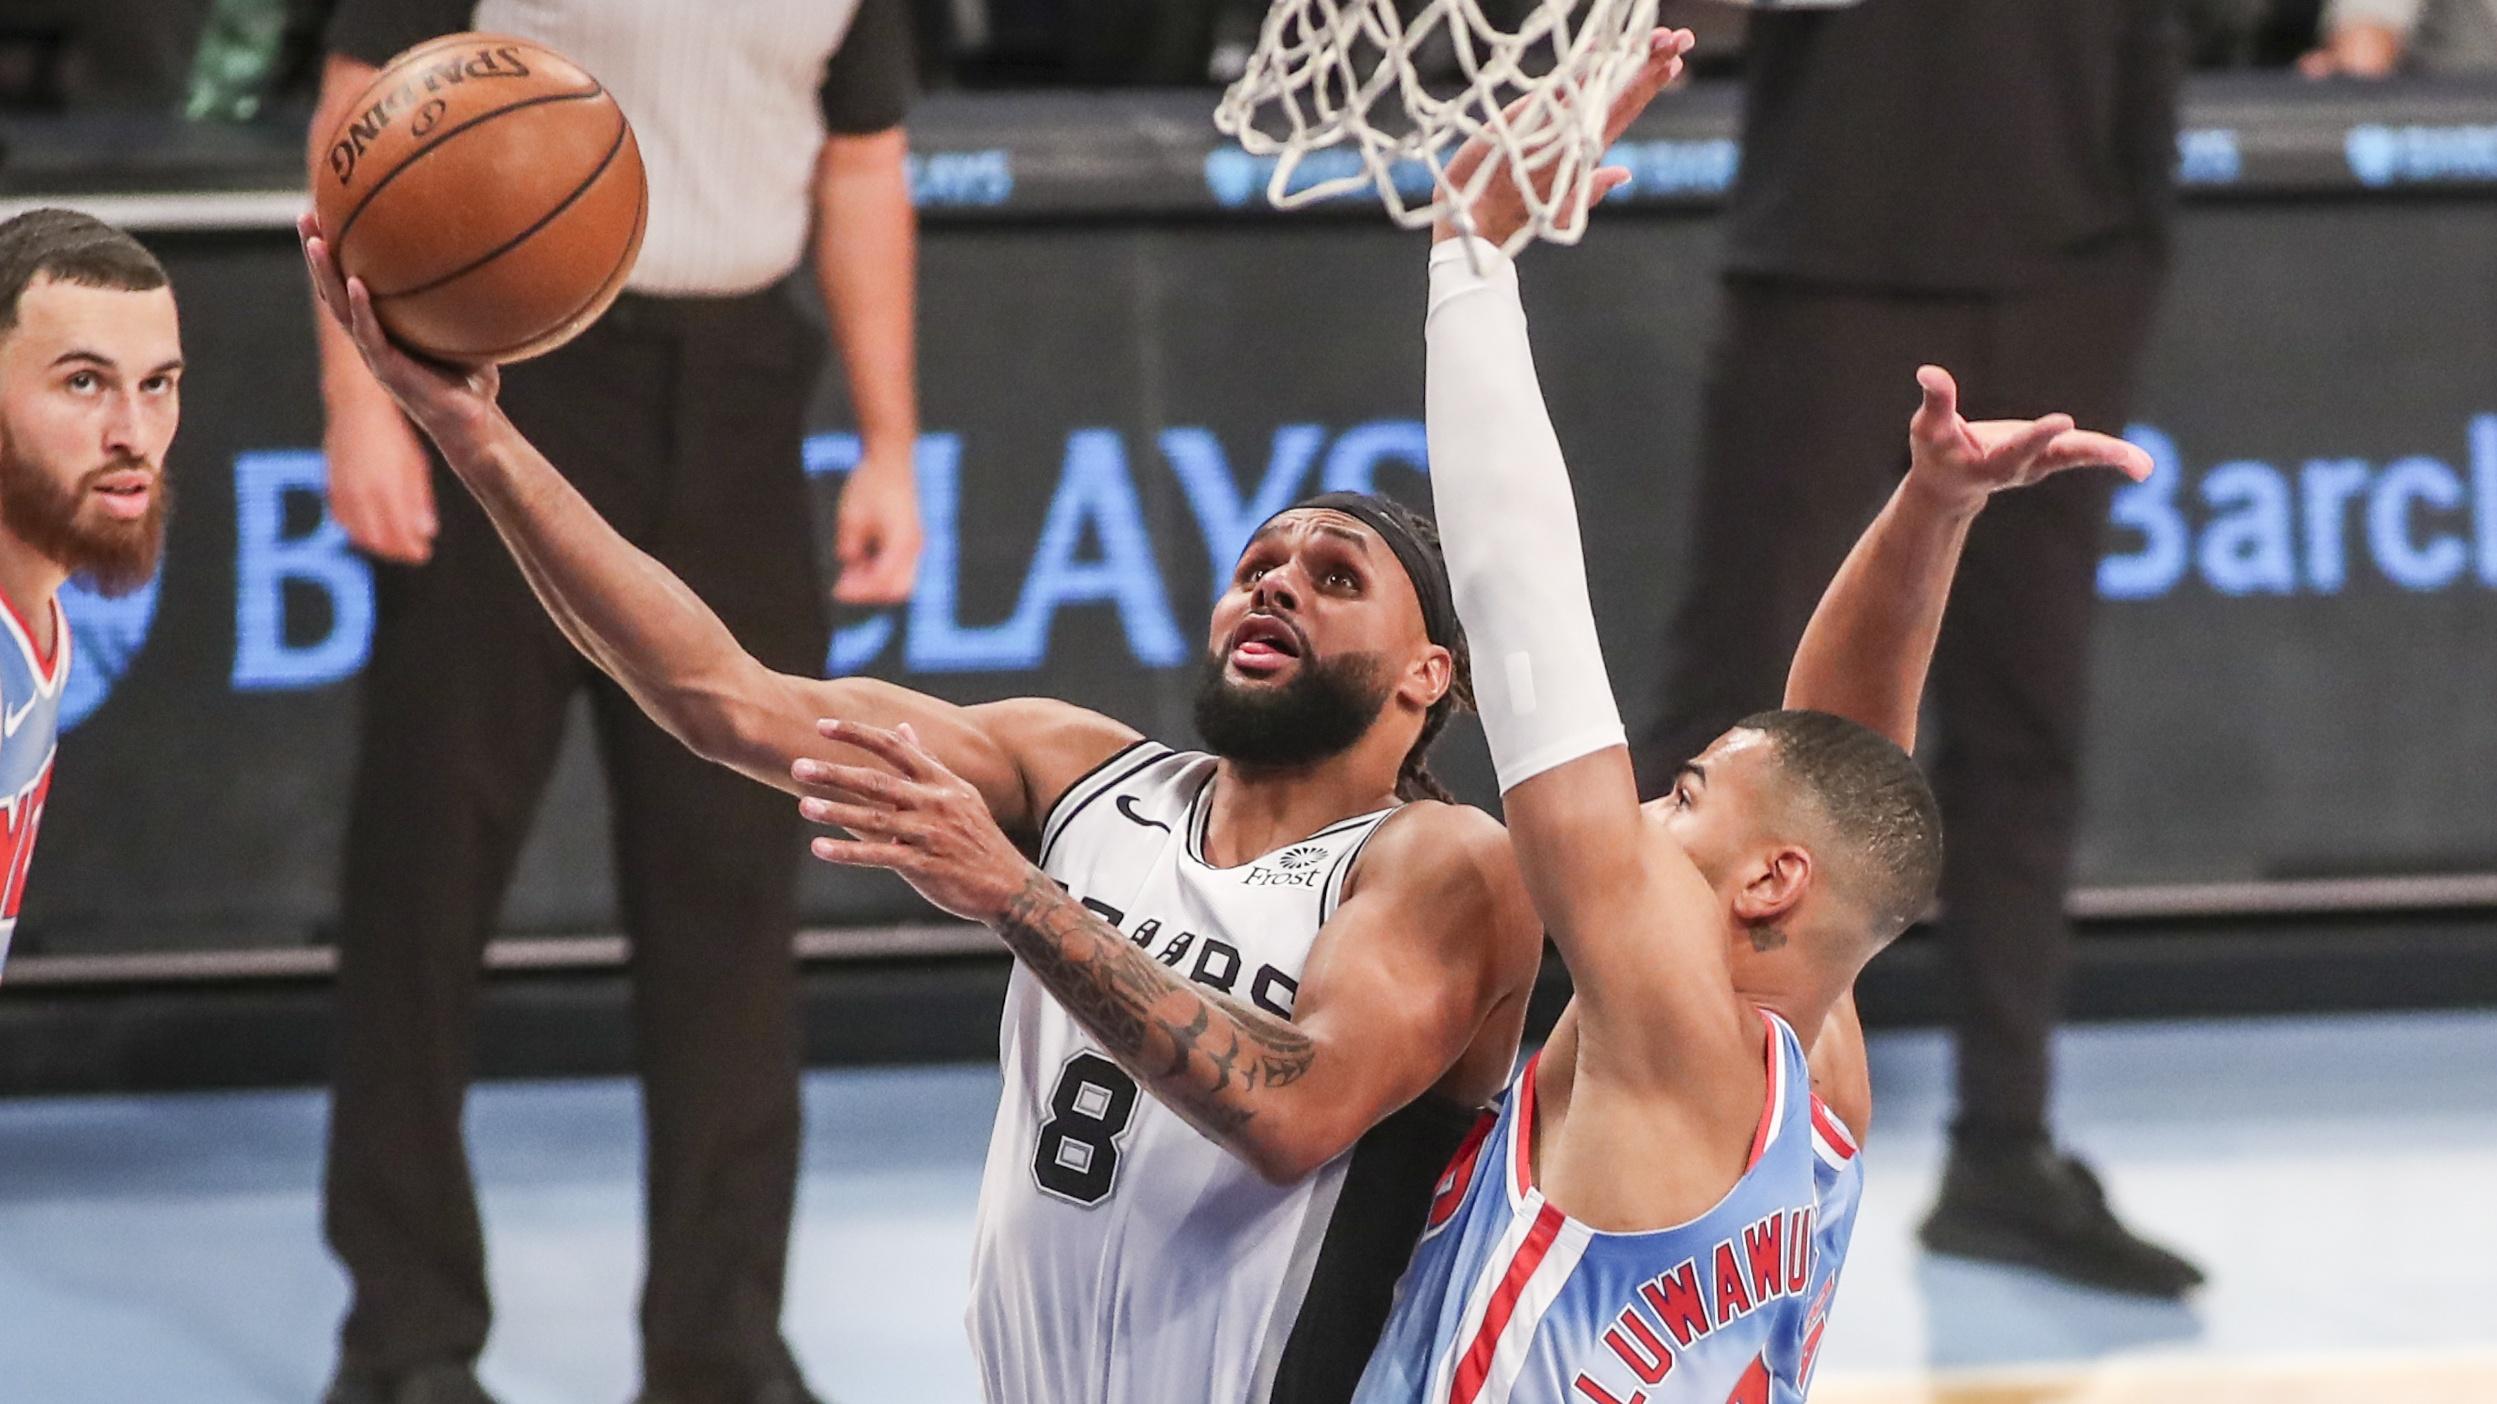 May 12, 2021; Brooklyn, New York, USA; San Antonio Spurs guard Patty Mills (8) goes to the basket during the second quarter against the Brooklyn Nets at Barclays Center. Mandatory Credit: Wendell Cruz-USA TODAY Sports / © Wendell Cruz-USA TODAY Sports